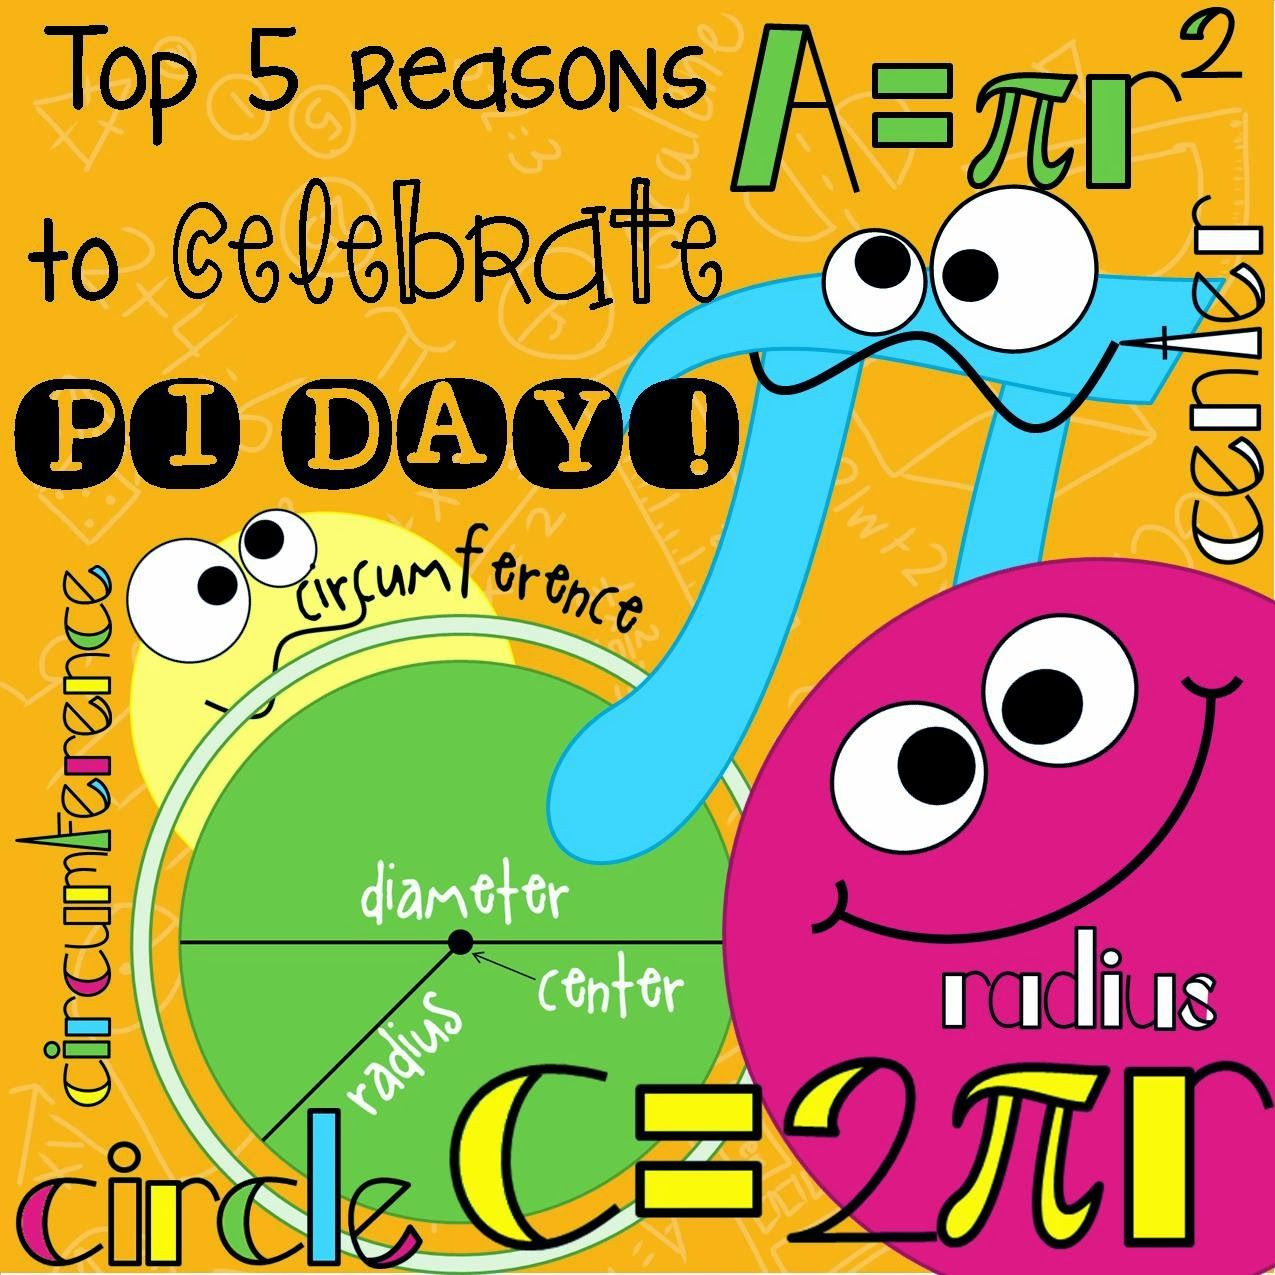 Pi Day Activities 2014
 Top 5 Reasons to Celebrate PI DAY All Things Upper